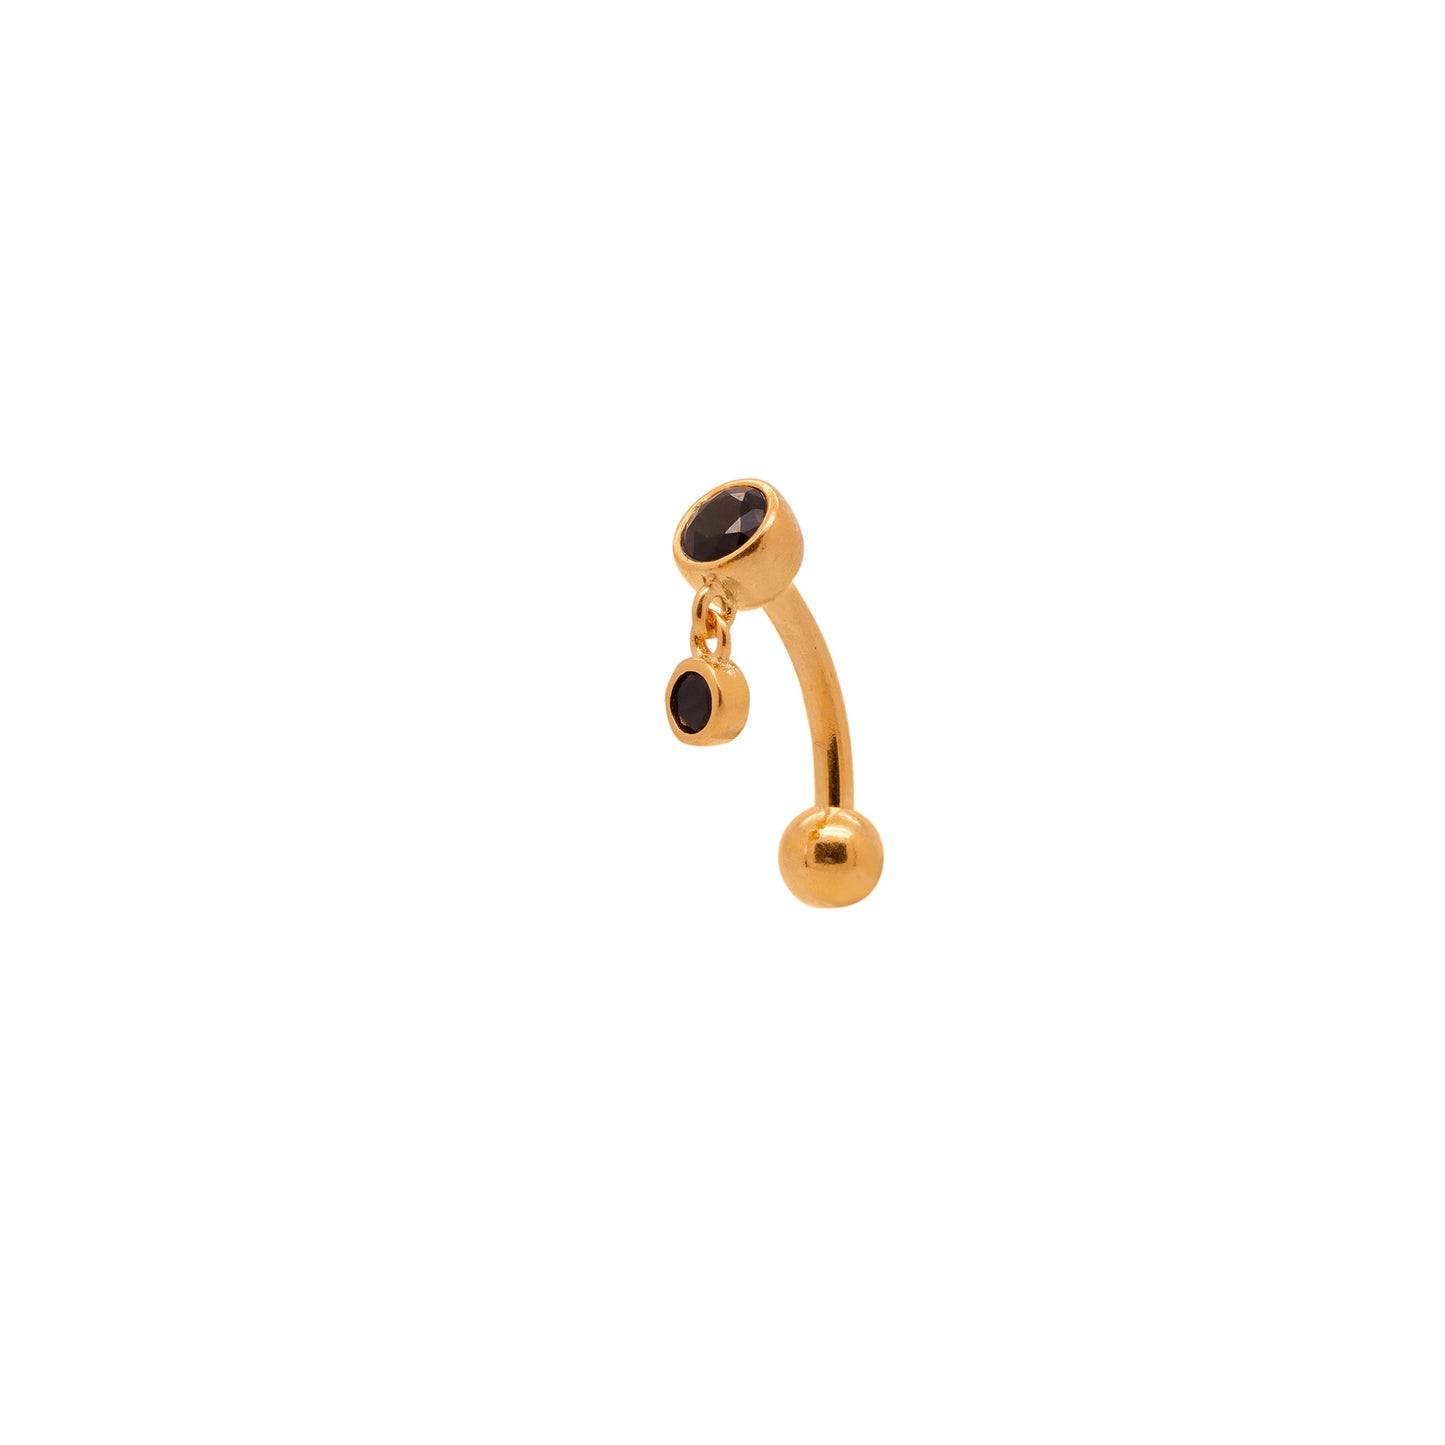 Vermeil | 925 Silver 24k Gold Coated 14G Black Petite Charm Dangle Reverse Belly Ring | 6mm 1/4" 8mm 5/16" 10mm 3/8" - Sturdy South